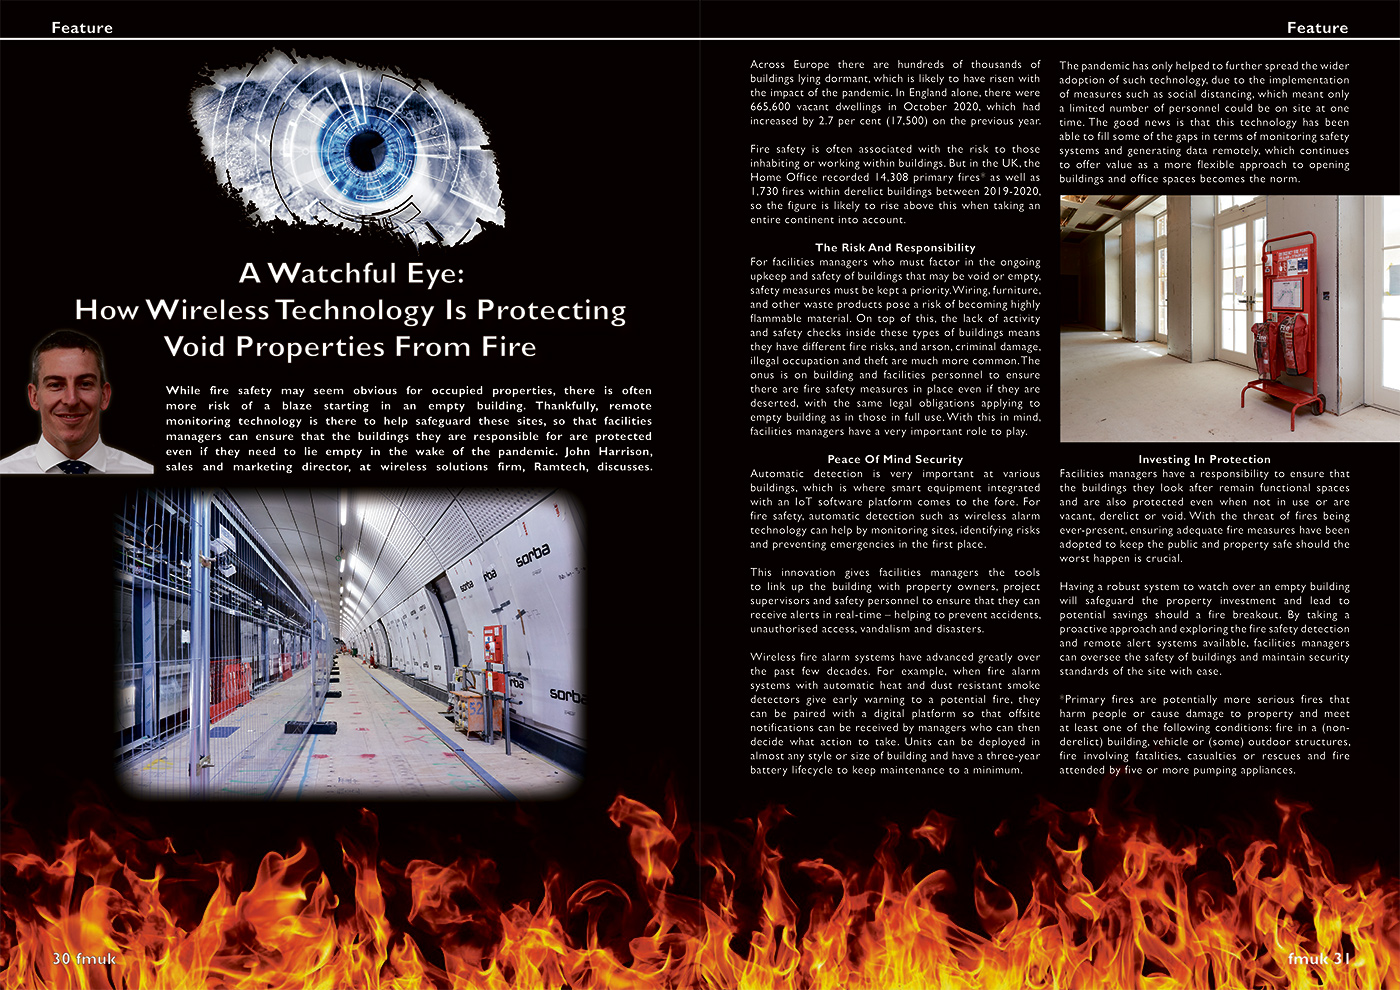 A Watchful Eye: How Wireless Technology Is Protecting Void Properties From Fire